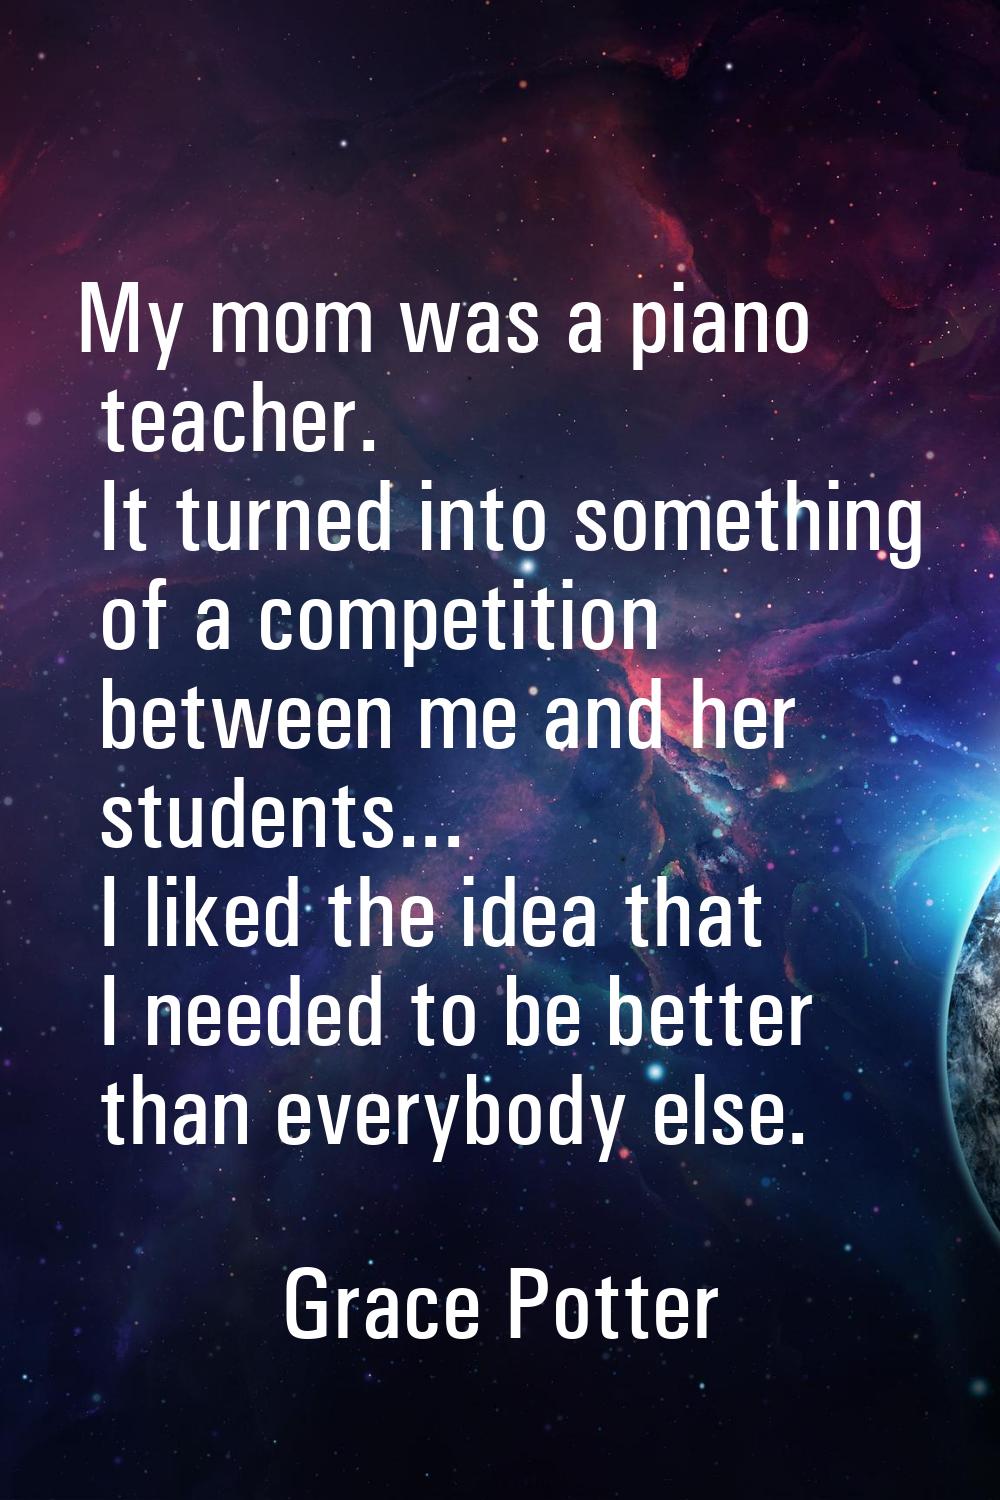 My mom was a piano teacher. It turned into something of a competition between me and her students..